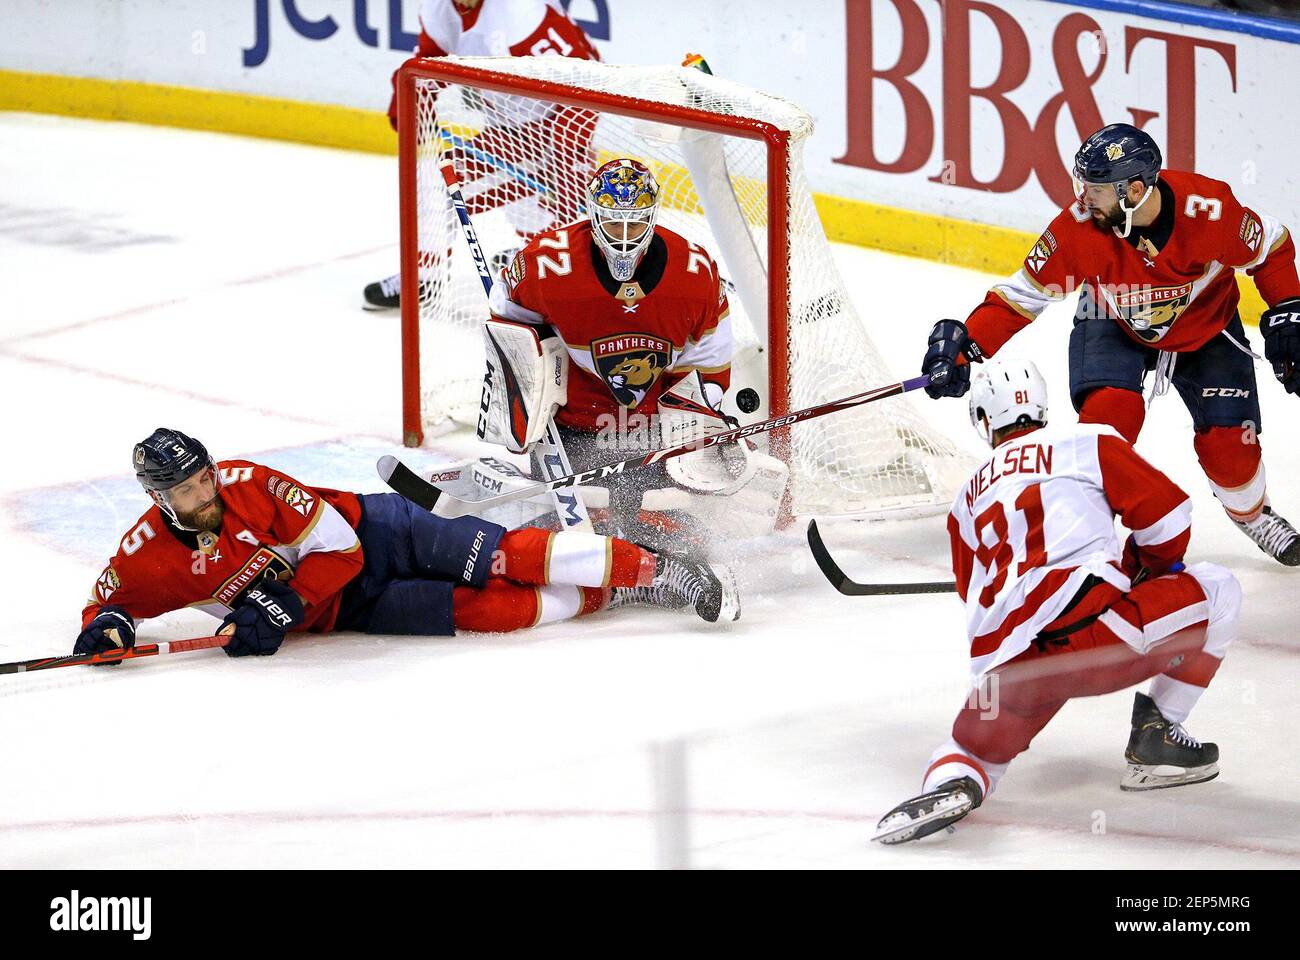 Florida Panthers defensemen Aaron Ekblad (5) and Keith Yandle (3) combine with Panthers goalie Sergei Bobrovsky (72) to deny a shot by the Detroit Red Wings' Frans Nielsen (81) during the first periodÂ at the BB&T Center in Sunrise, Fla., on Saturday, Nov. 2, 2019. The Panthers won, 4-0. (David Santiago/Miami Herald/TNS) Stock Photo